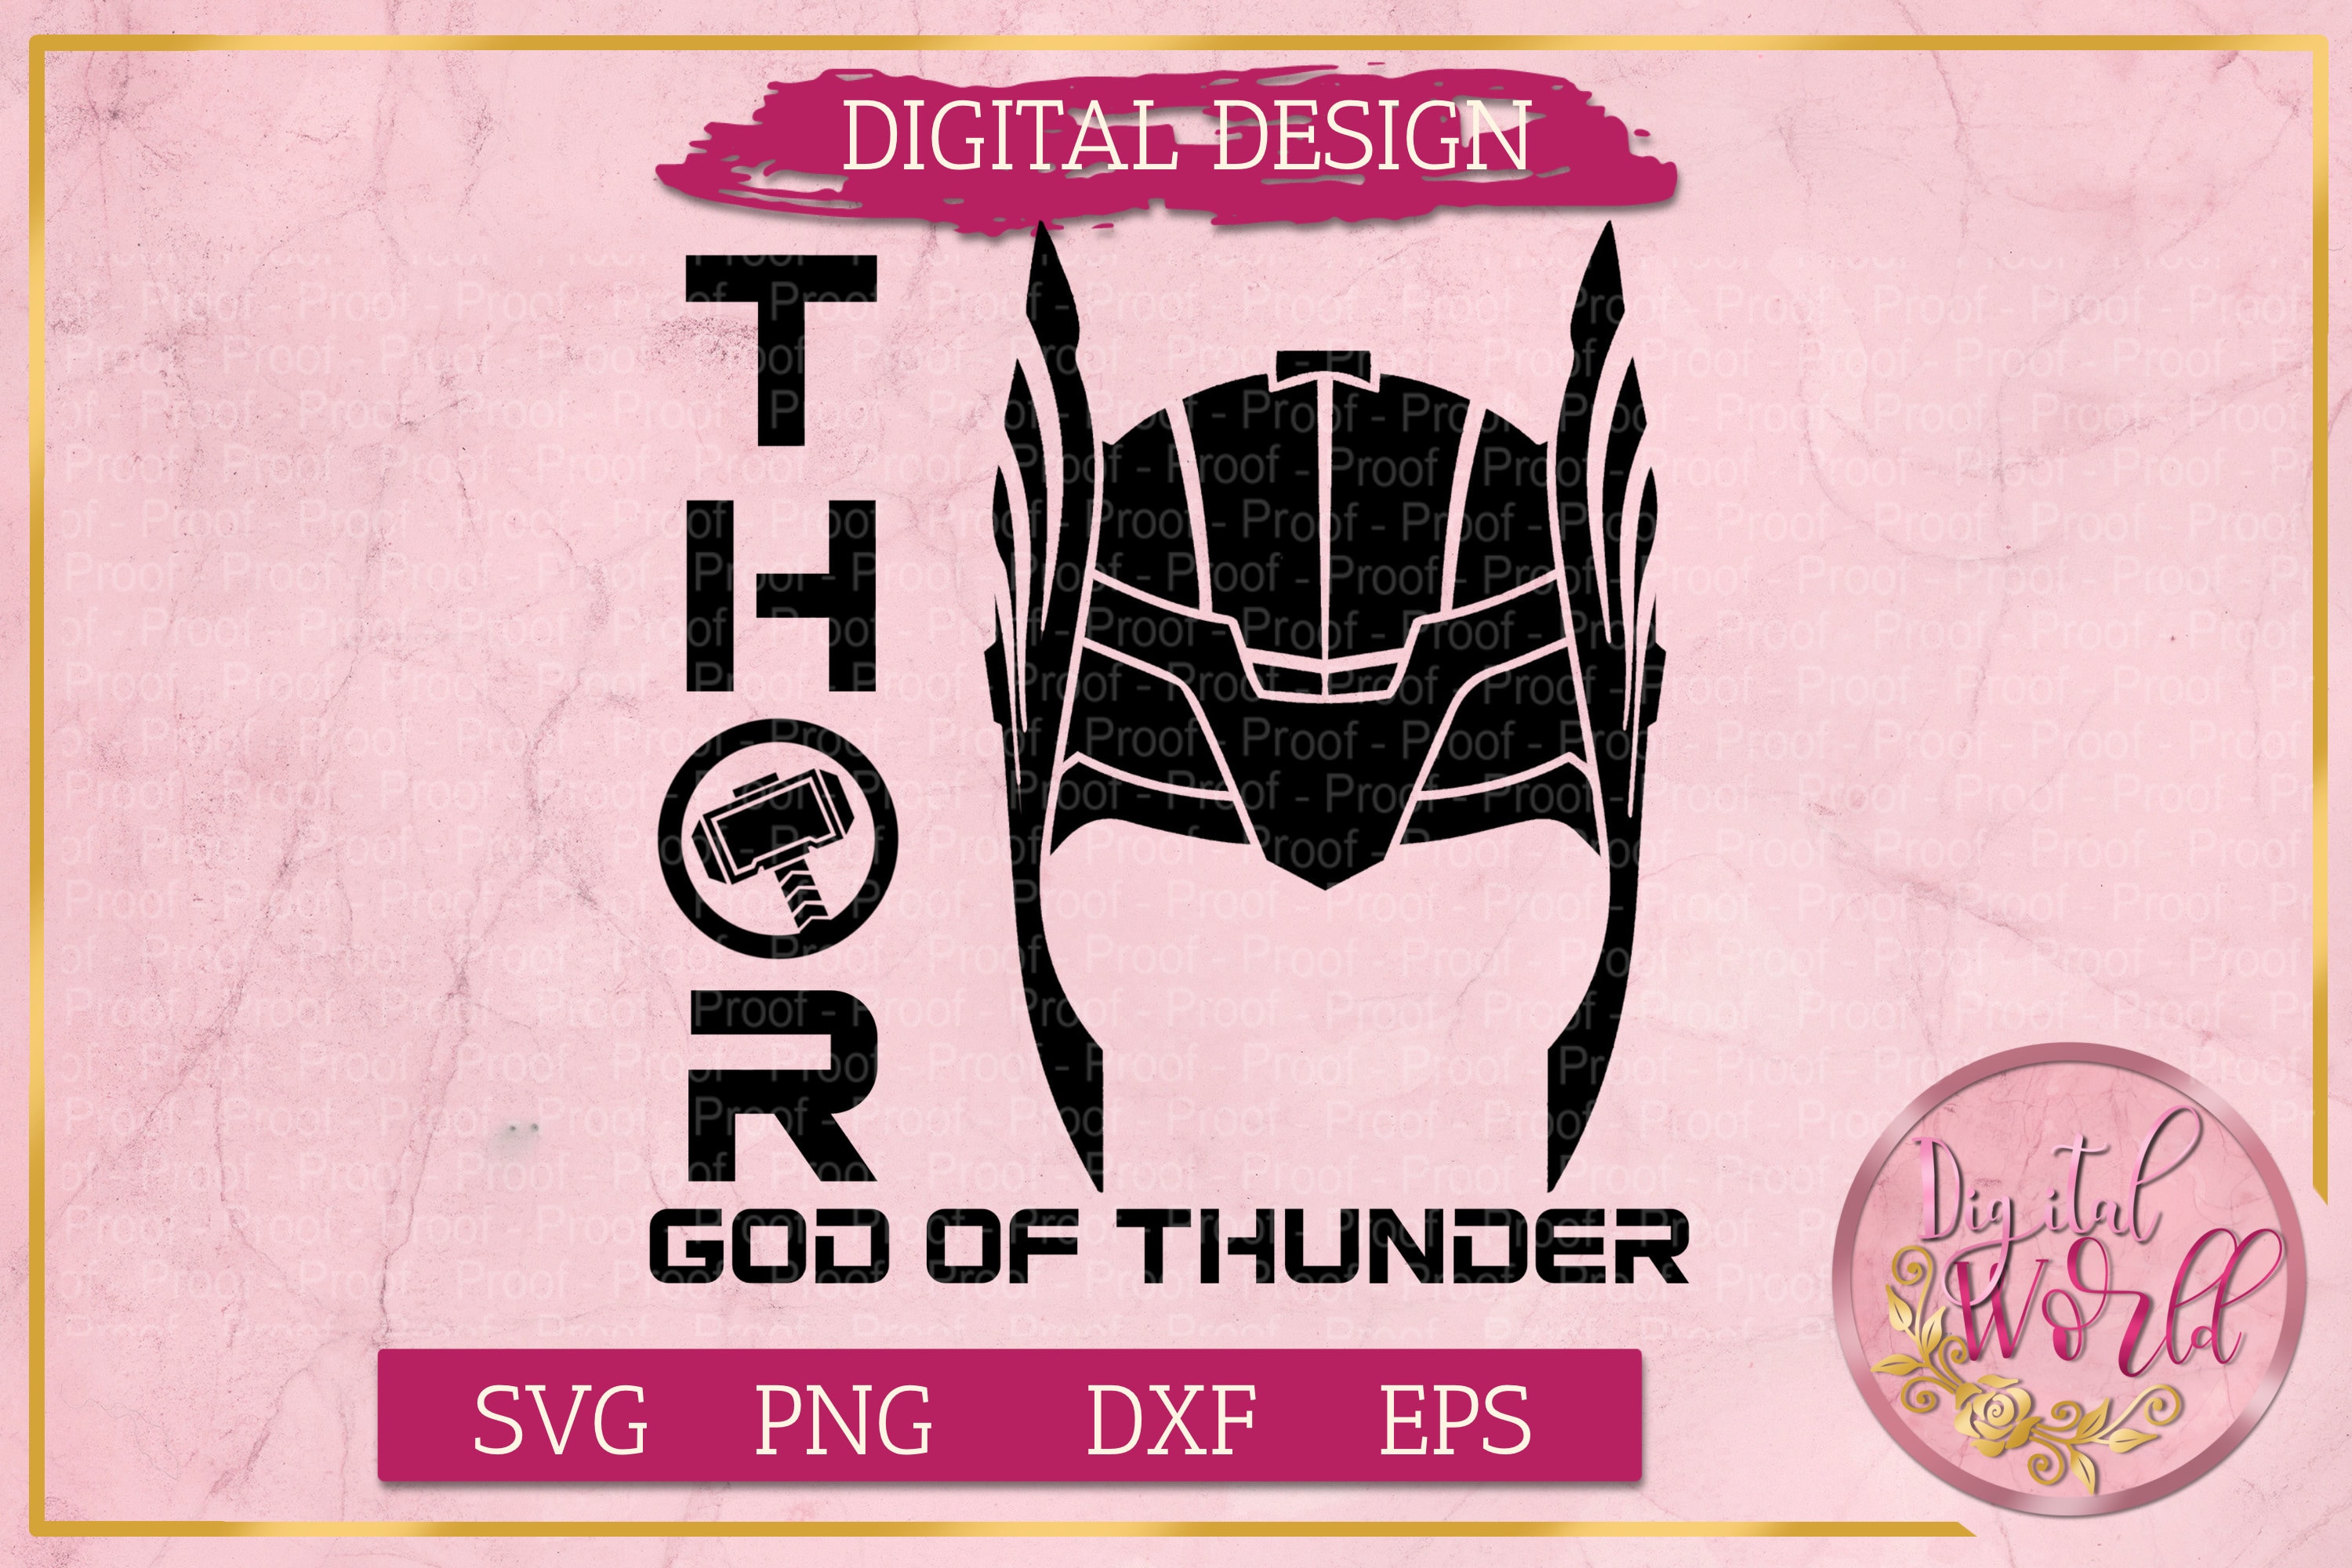 File:Thor Love and Thunder Logo.svg - Wikimedia Commons